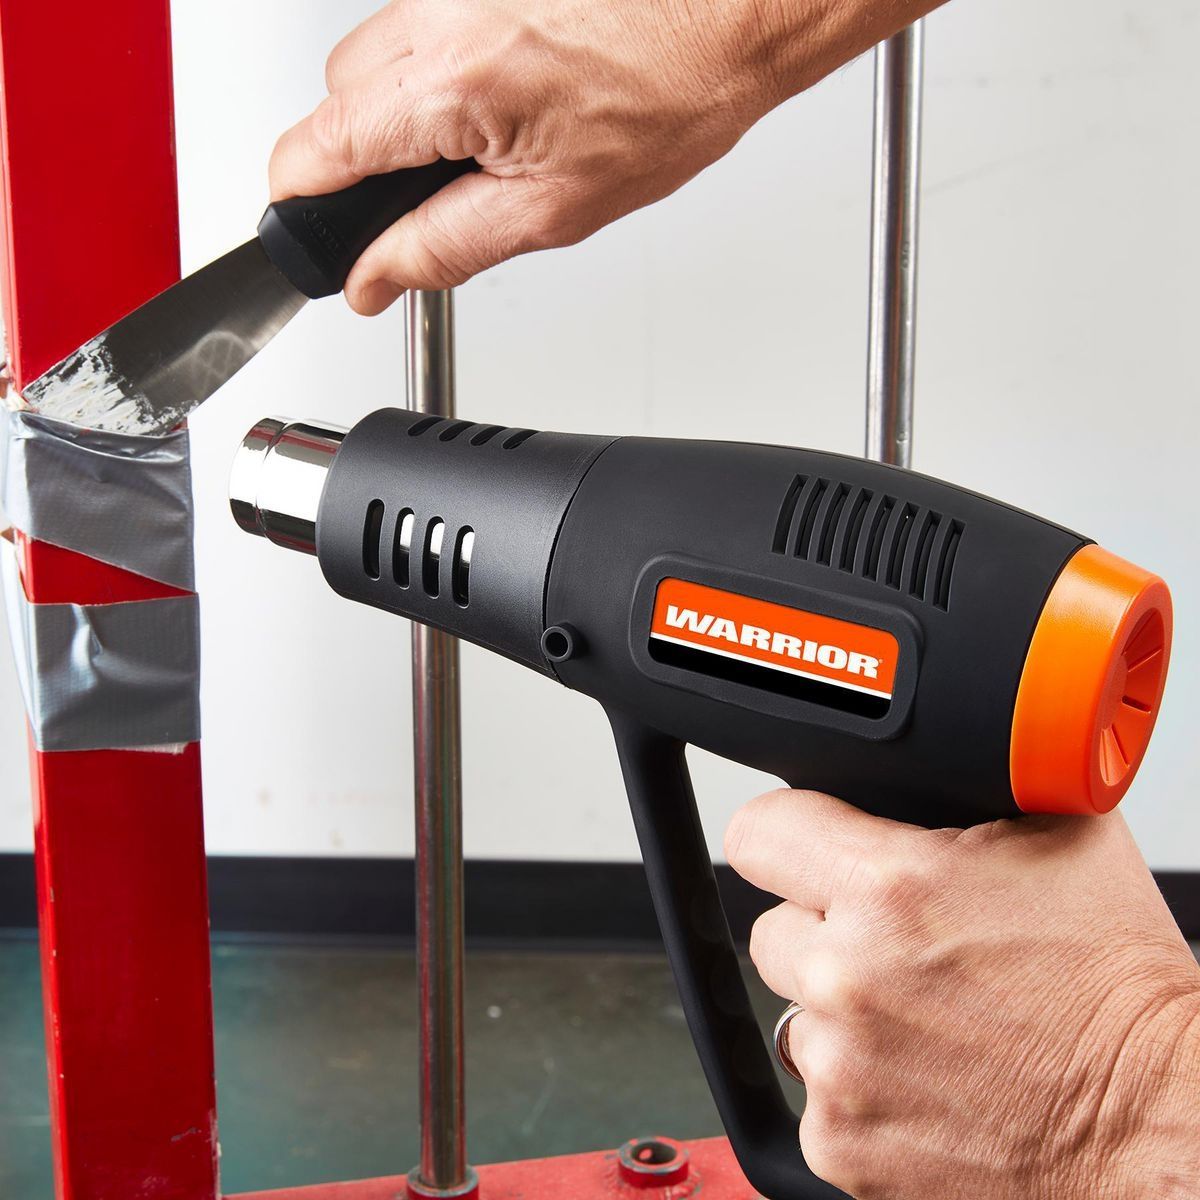 WARRIOR 1500 Watt Dual Temperature Heat Gun in use, efficiently stripping paint from a surface.